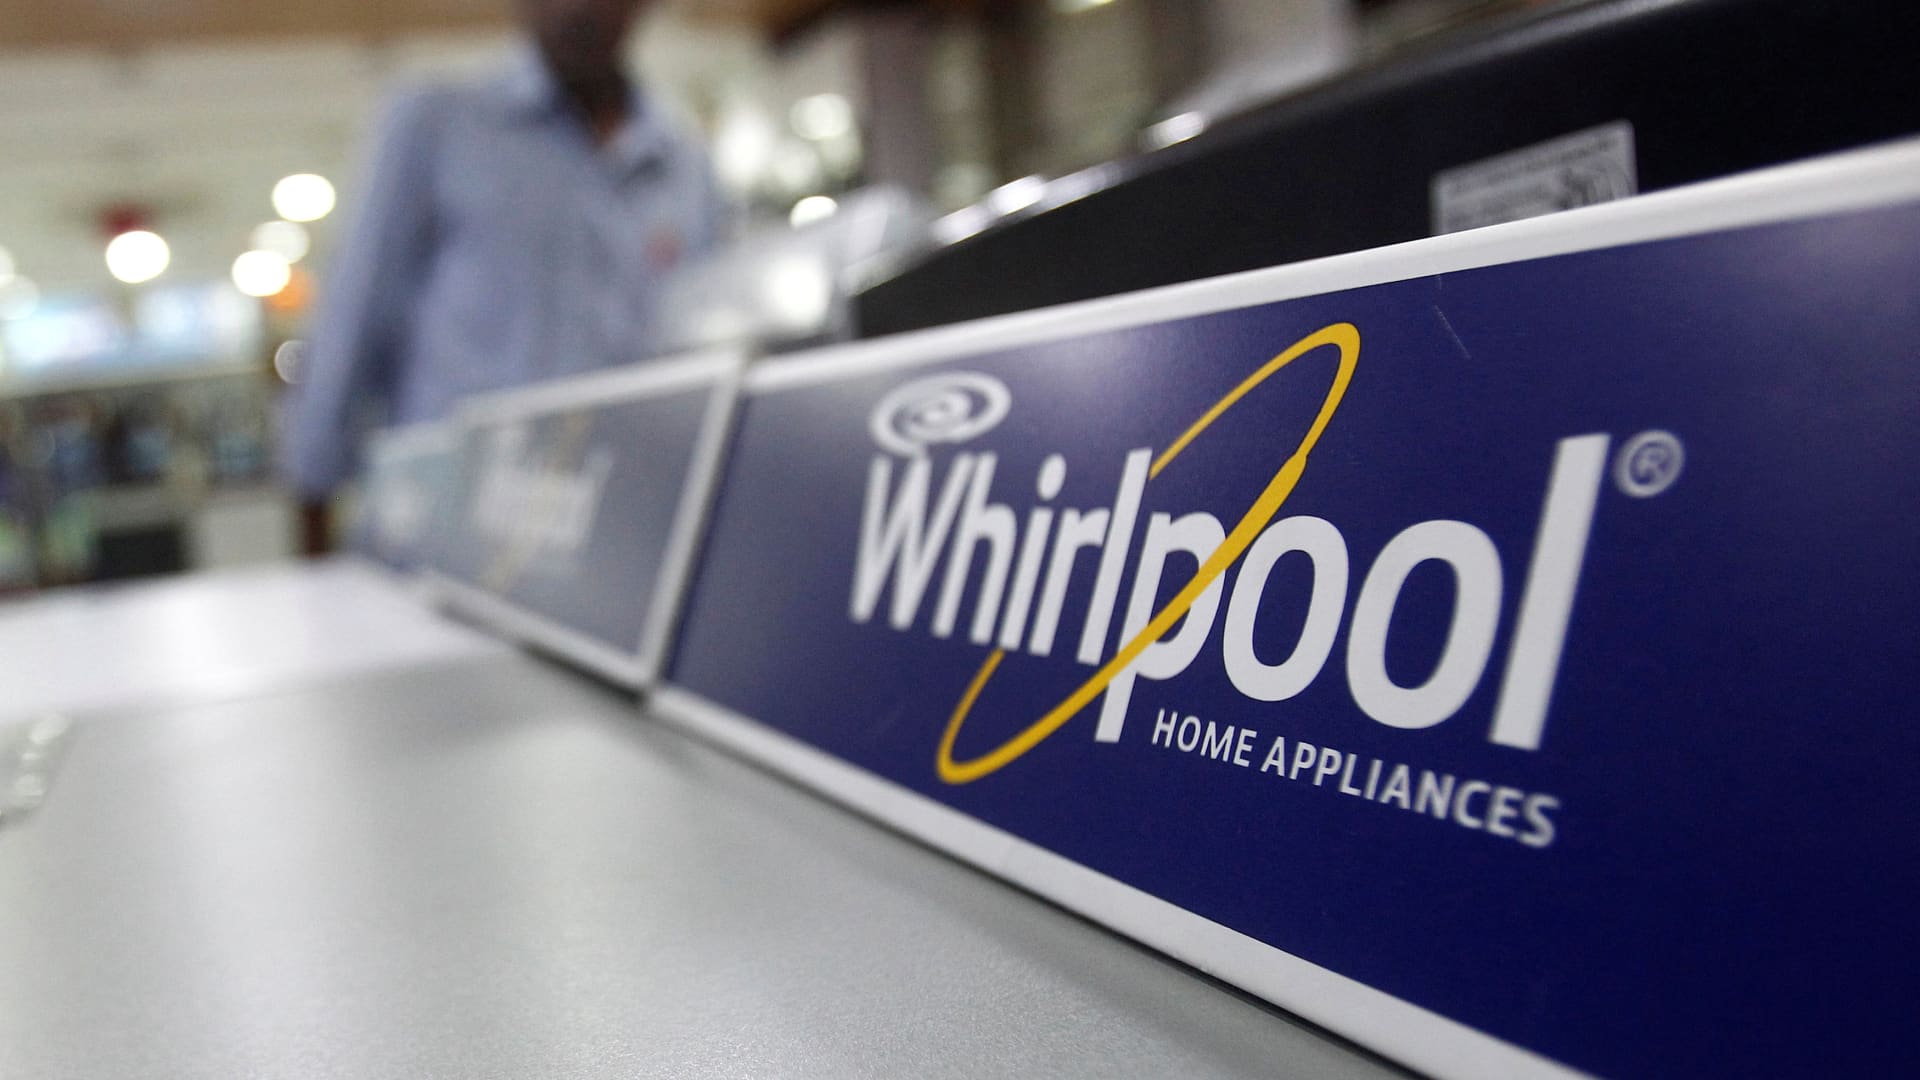 Stocks making the biggest moves after hours: Whirlpool, NXP Semiconductors, UnitedHealth and more